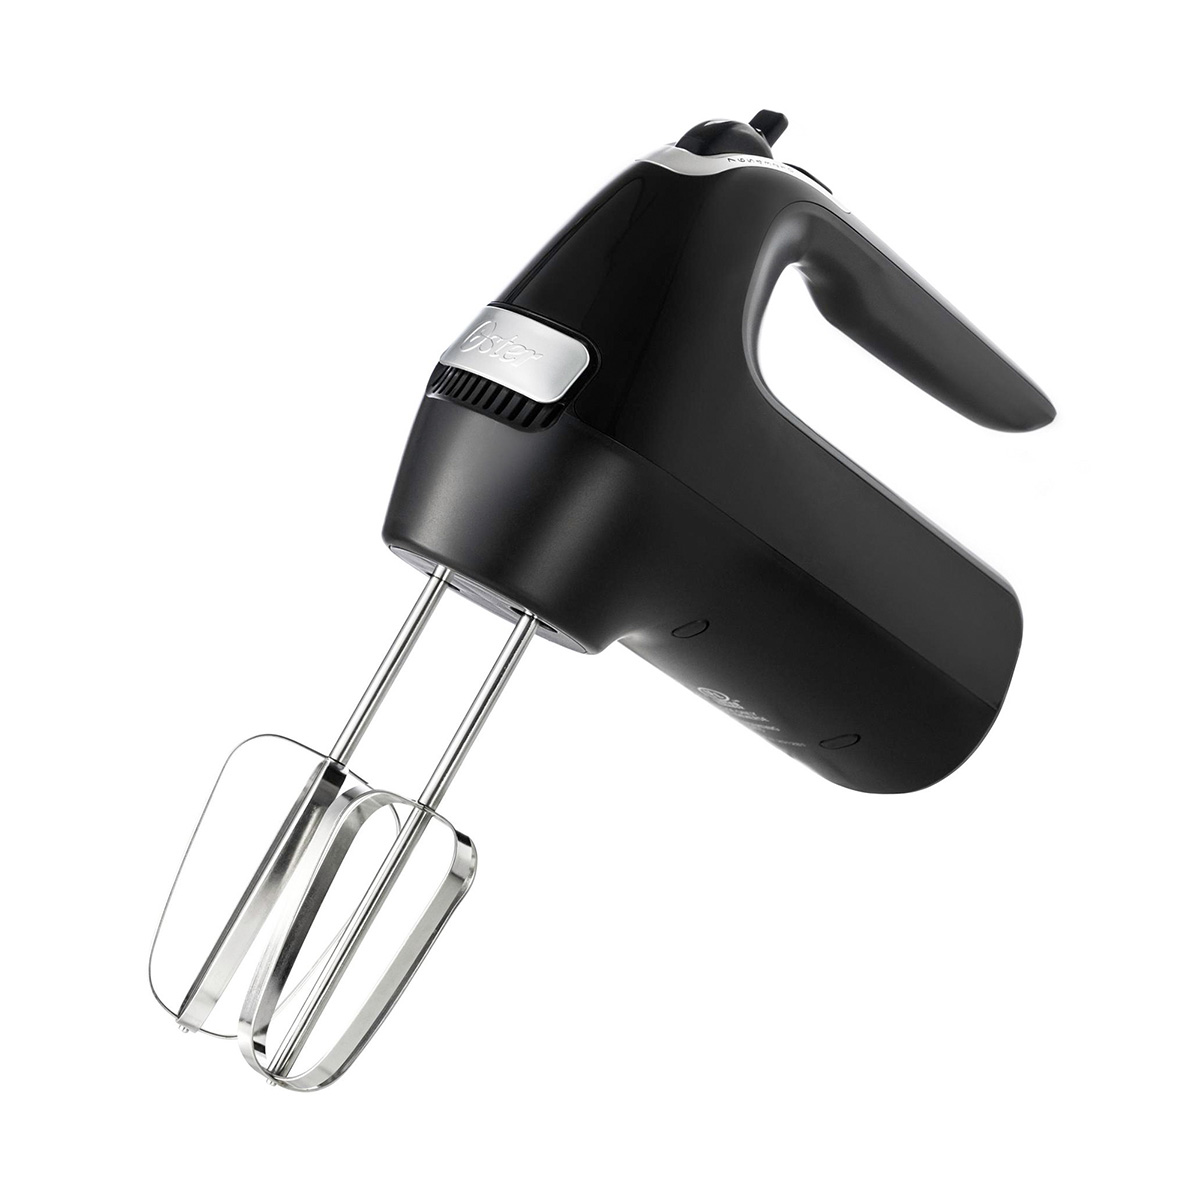 Oster Multi-Use Hand Mixer with Turbo Power and Storage Case